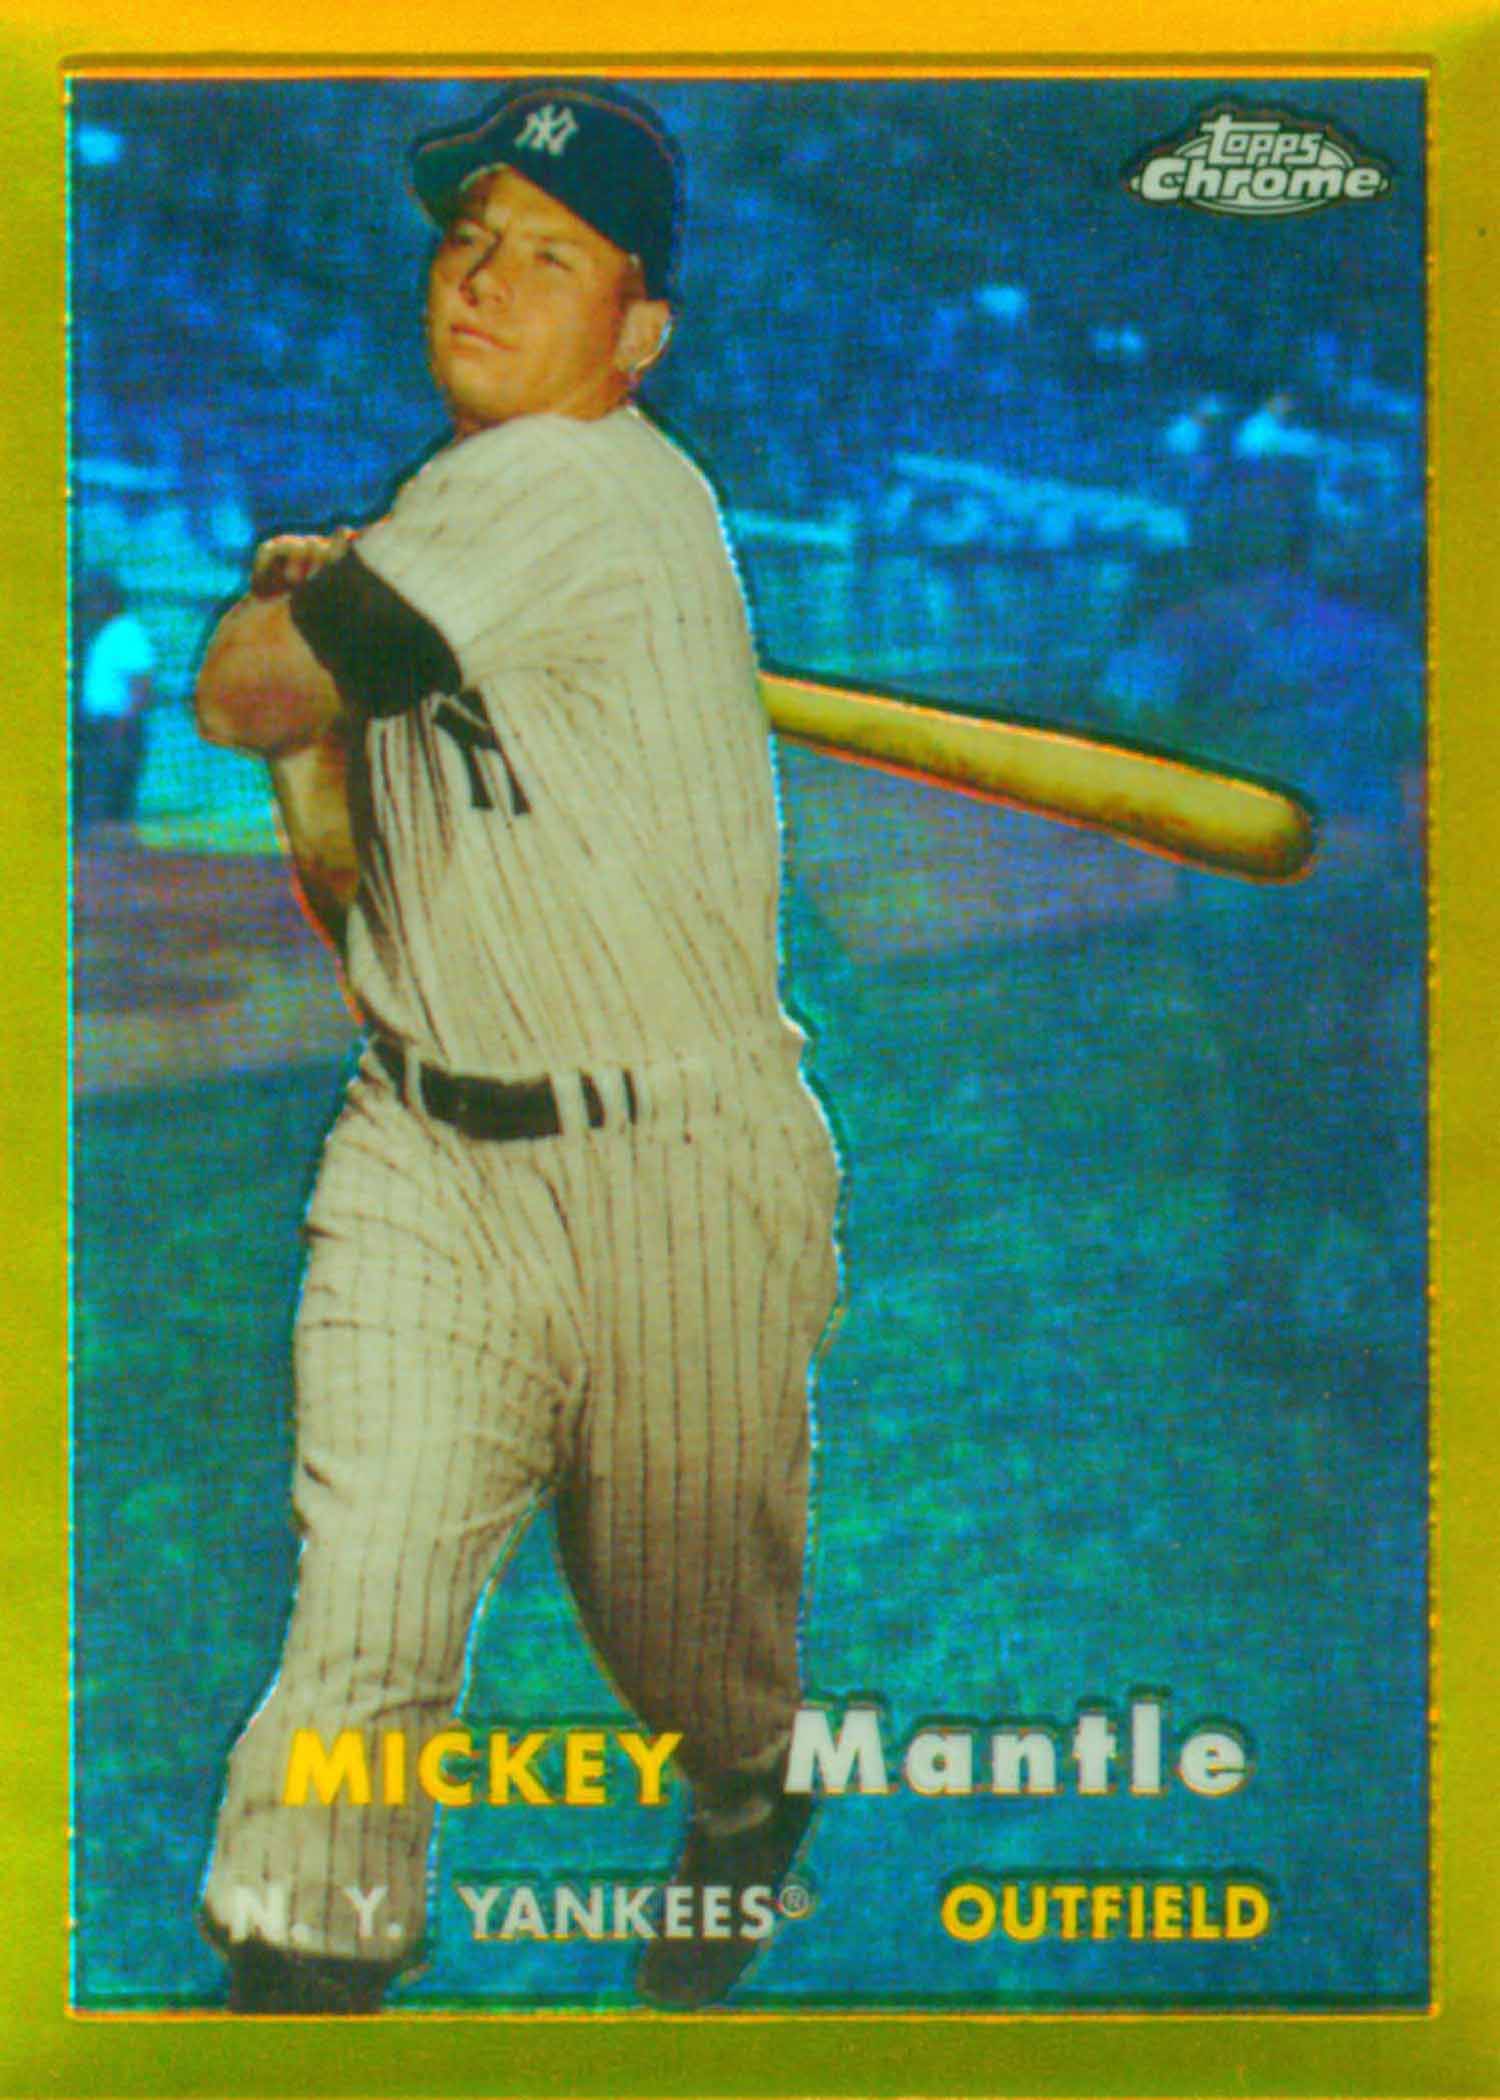 2009 Topps Factory Set Mantle Chrome Gold Refractors